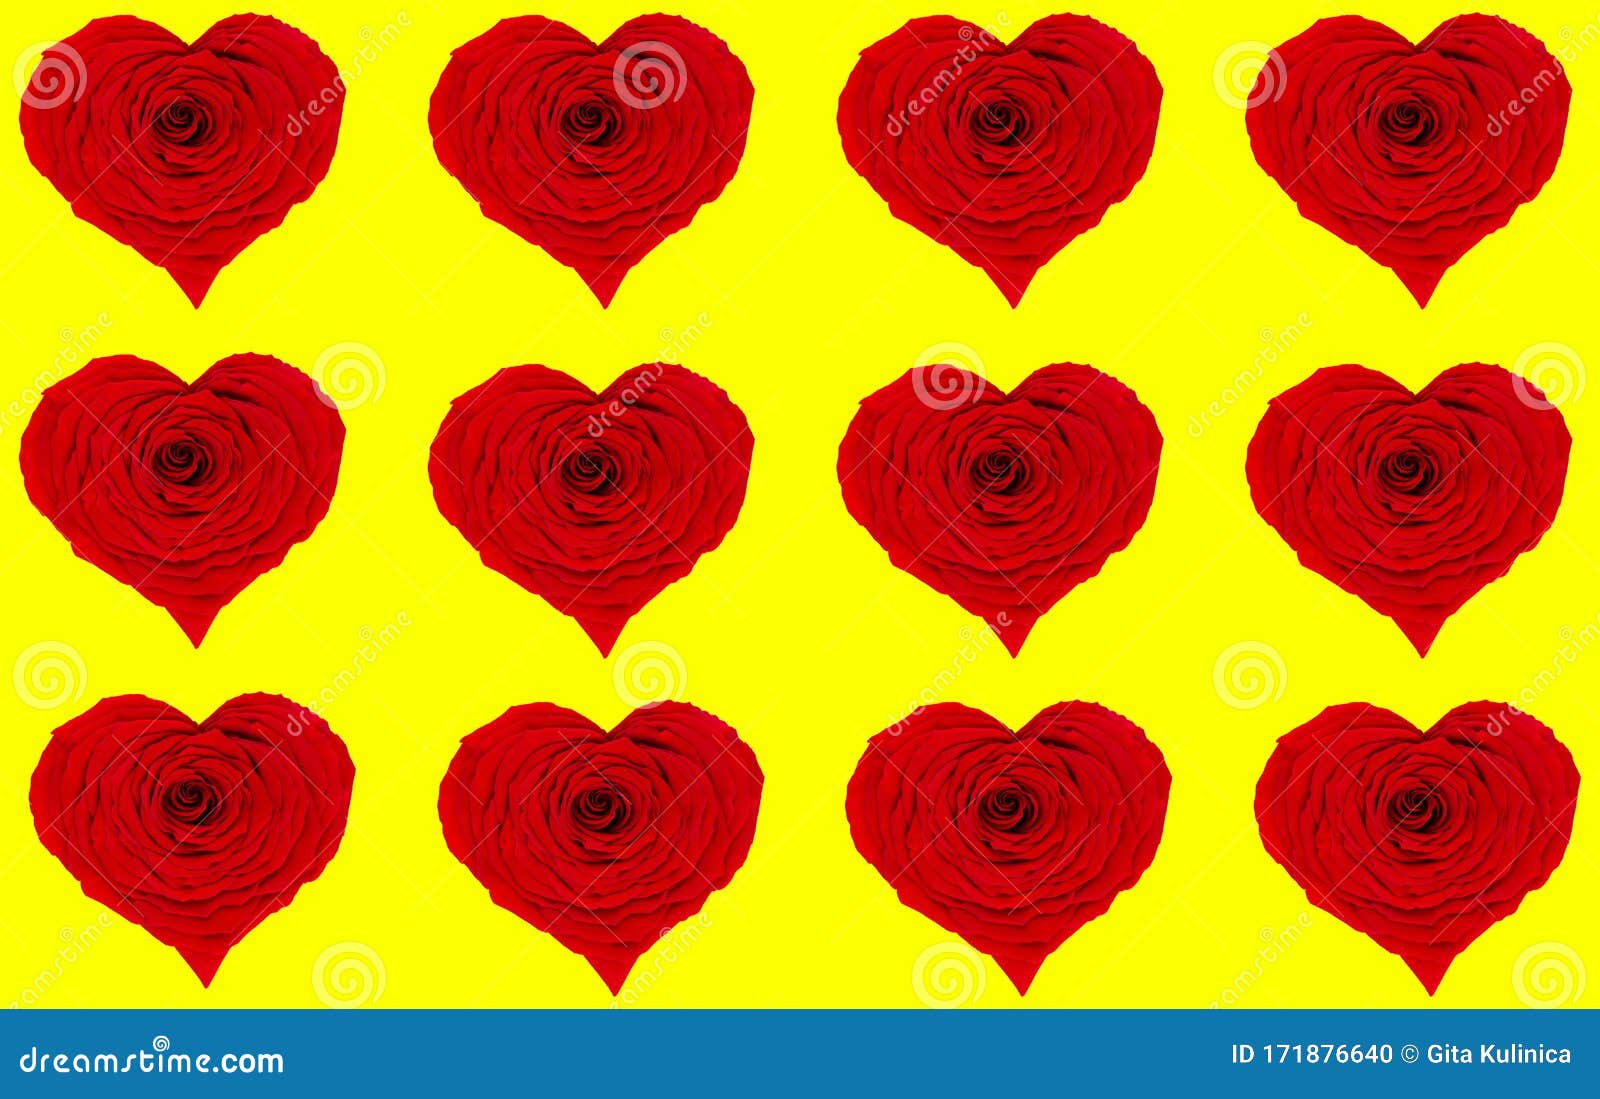 Red Rose Heart Shaped. Valentine or Wedding Background Stock Photo ...